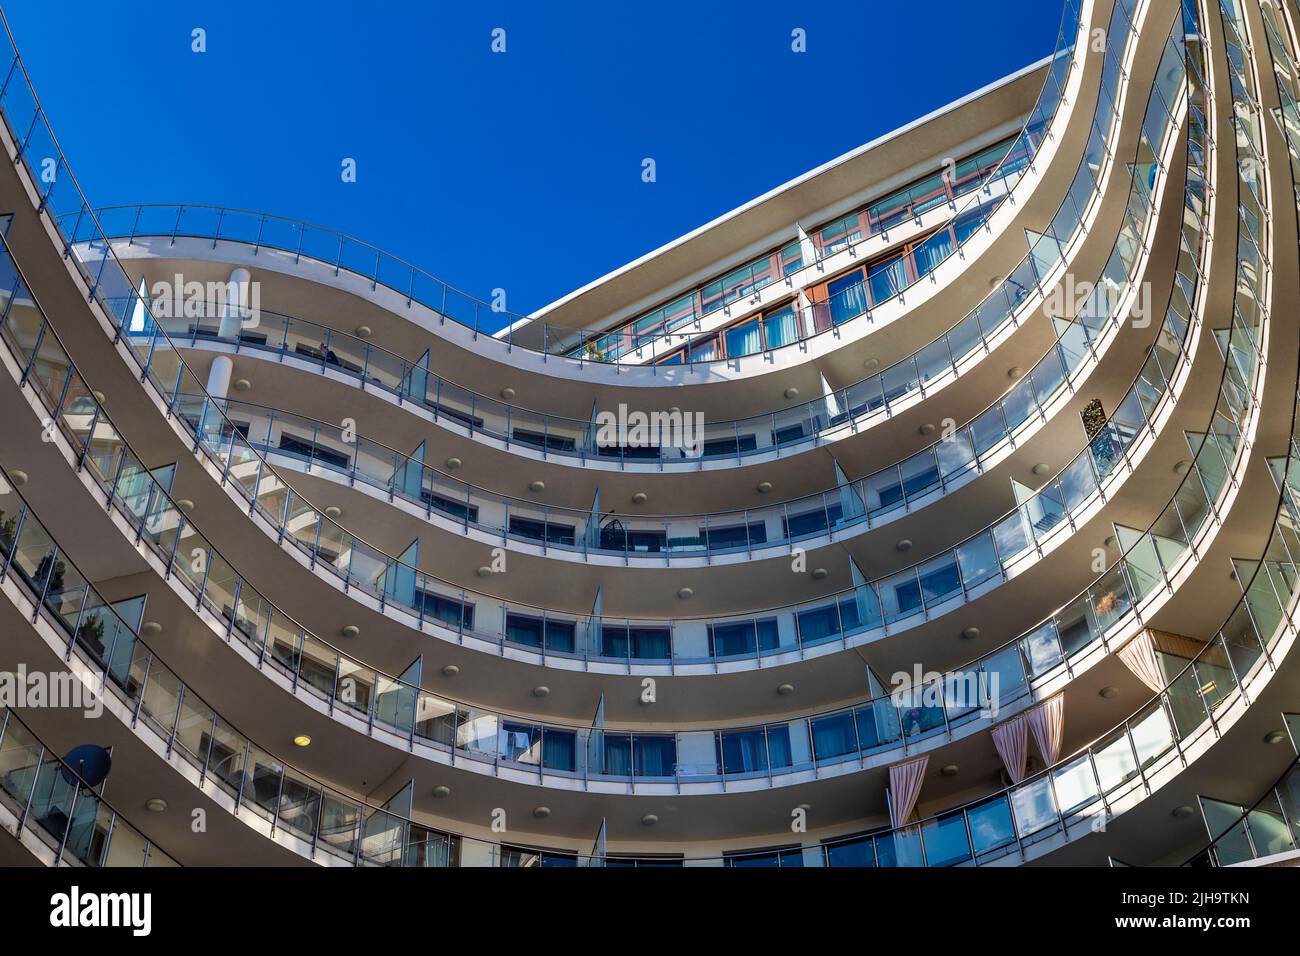 Wavy and flowing exterior of Solec 24 apartment complex in Solec, Warsaw, Poland Stock Photo